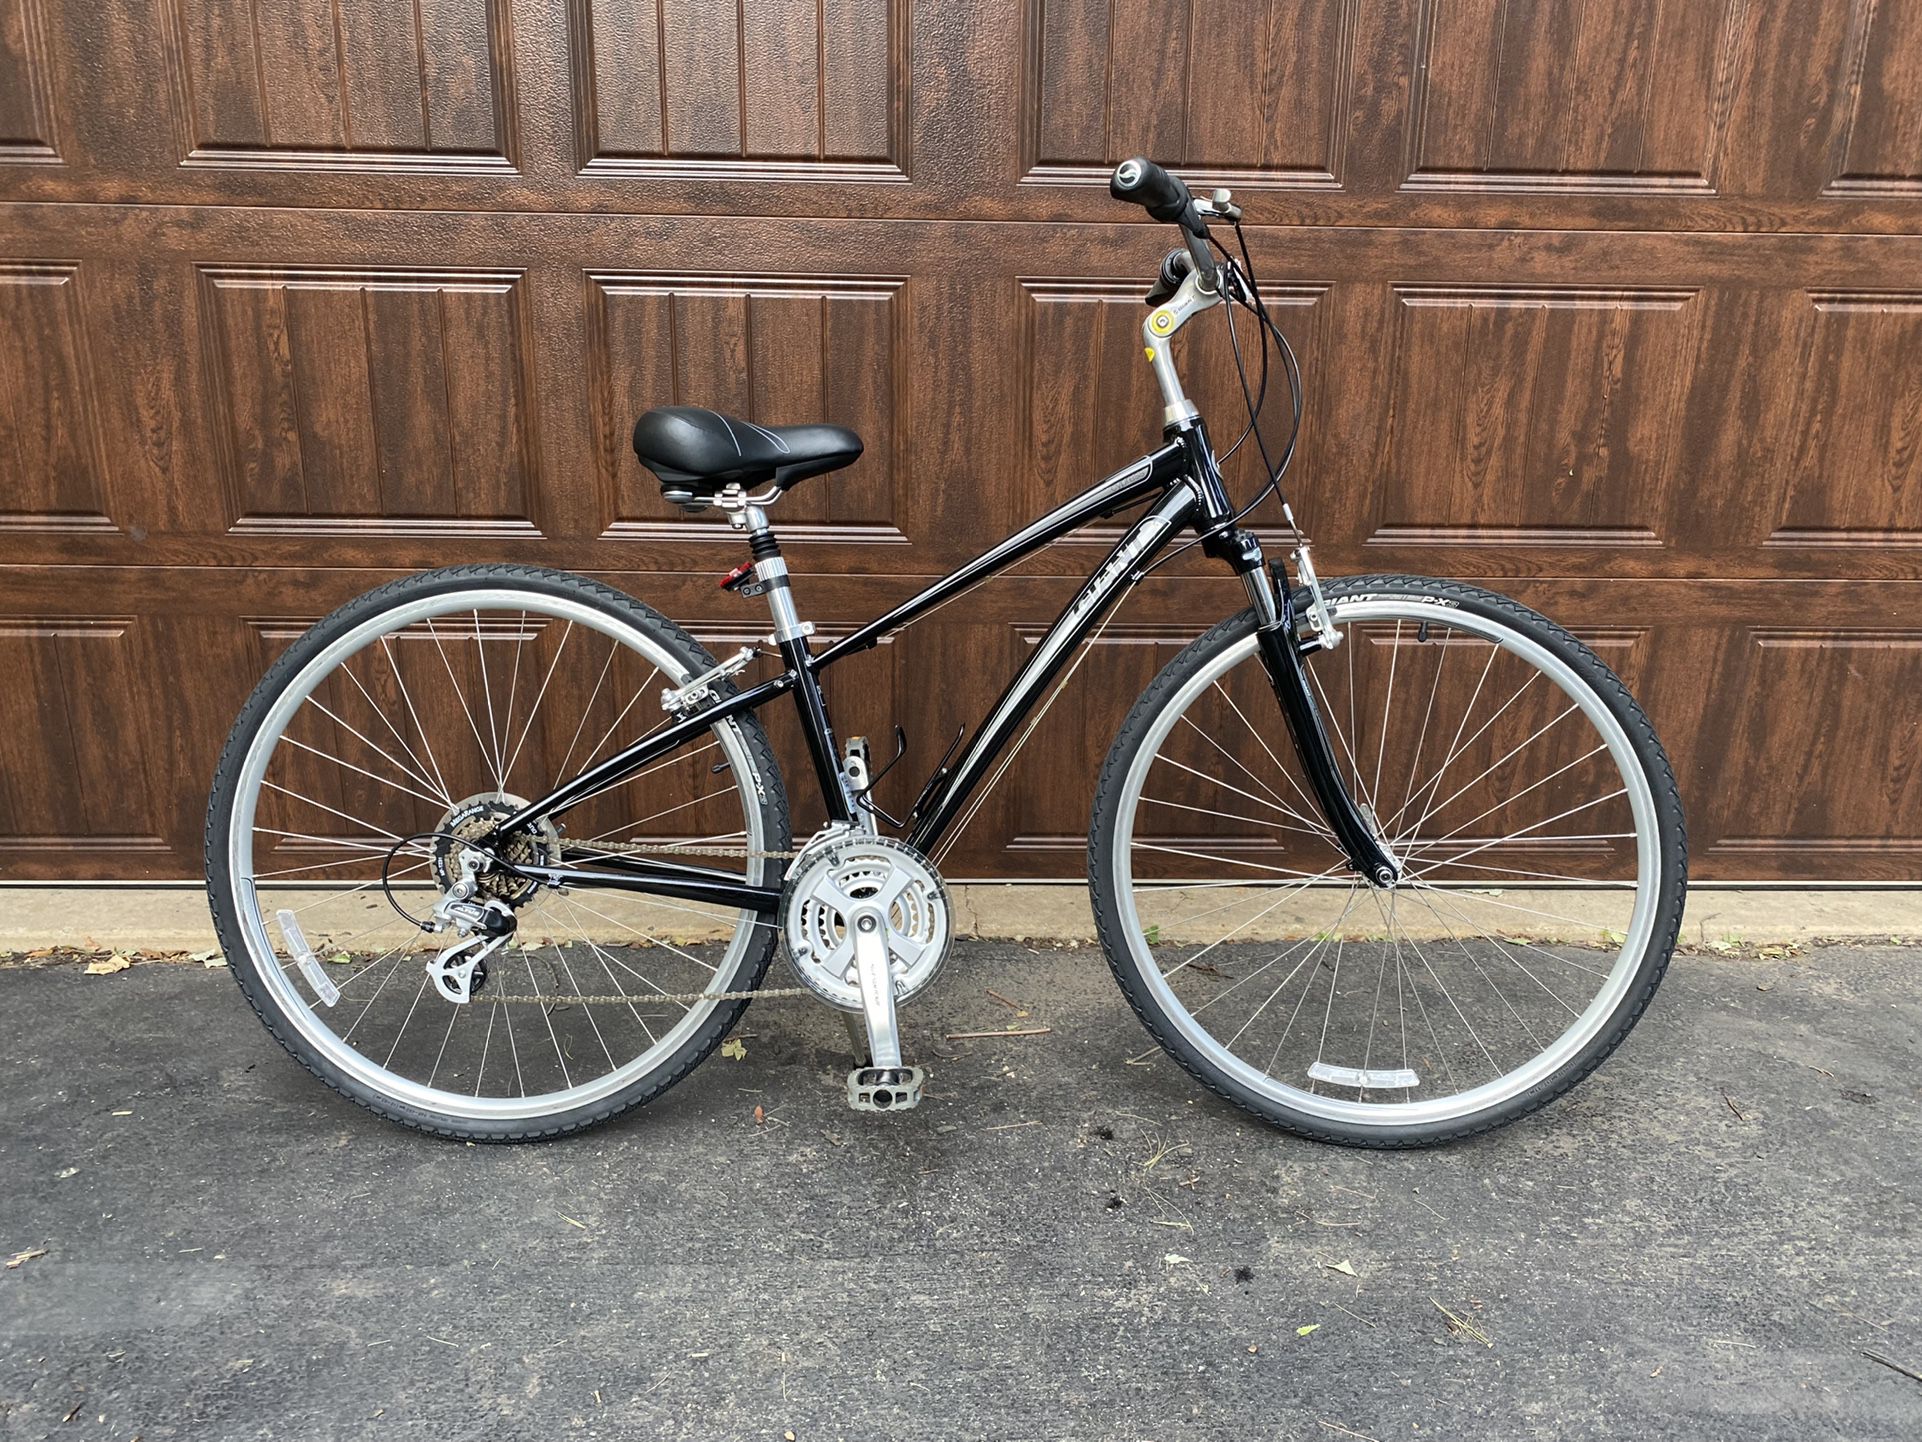 GIANT Cypress Hybrid (Mint Condition - 14.5” frame, 700x35 Tires)